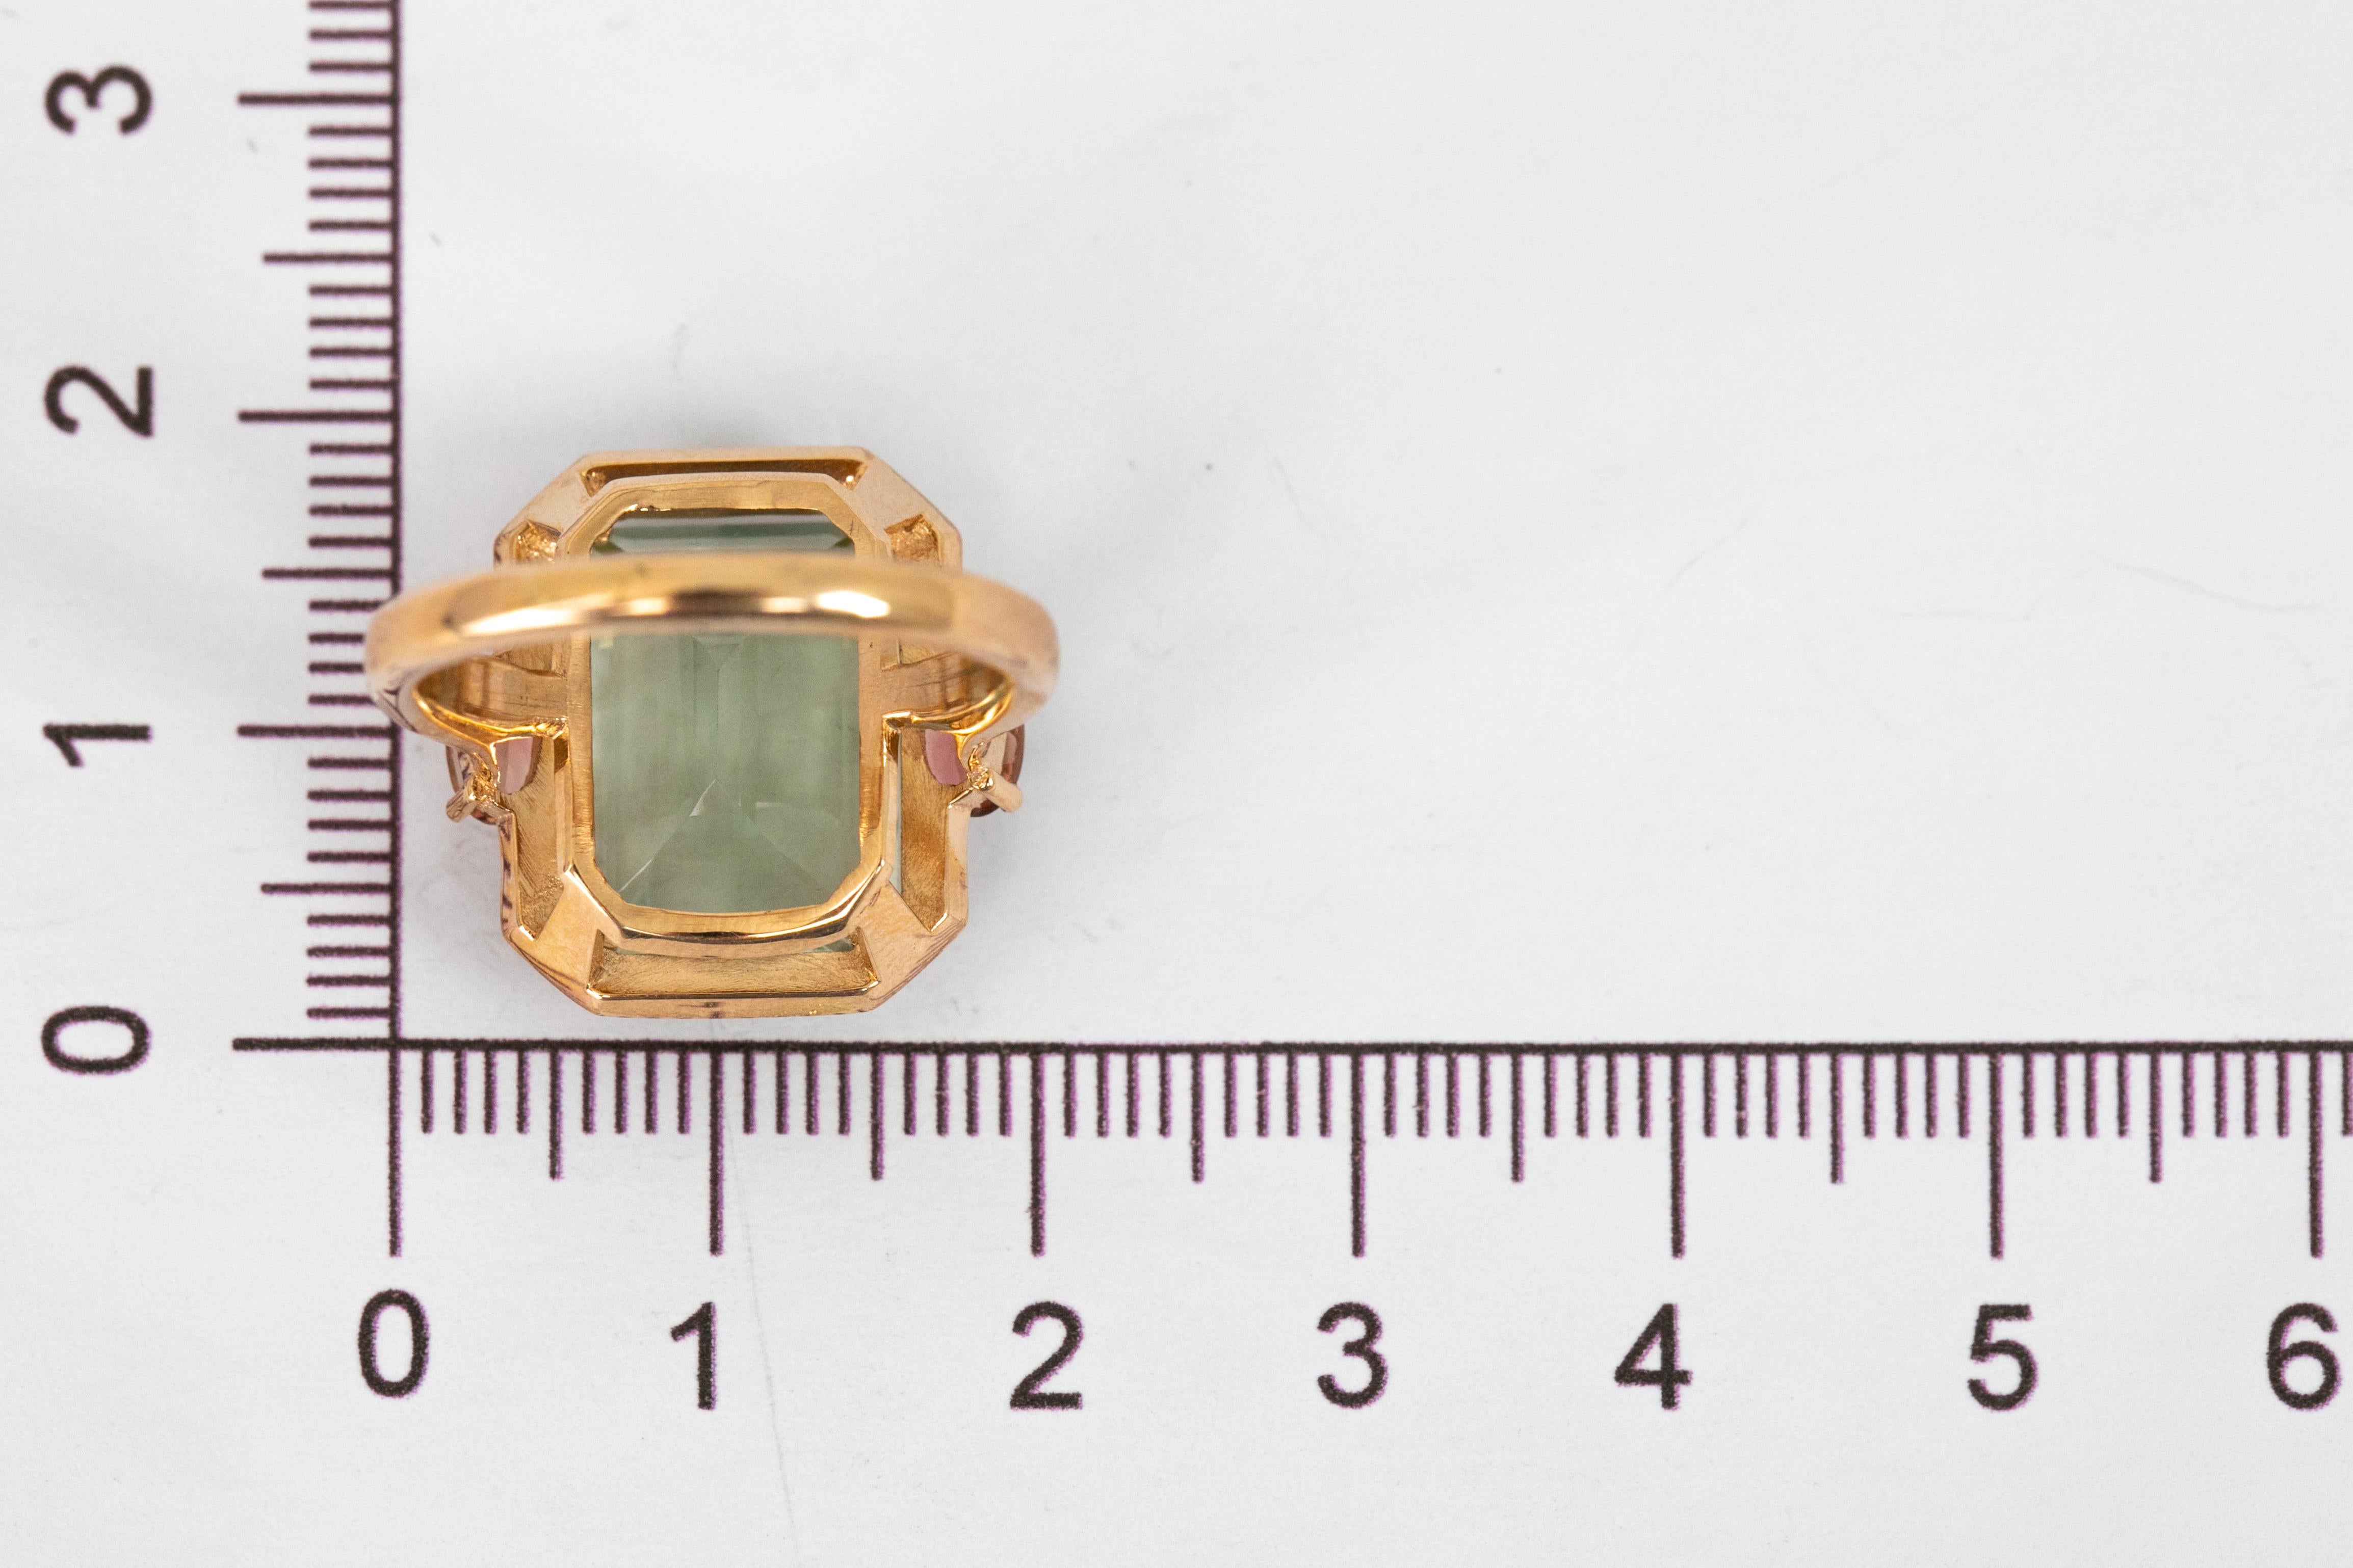 For Sale:  Artdeco Style Ring, 14k Solid Gold, Green Amethyst and Pink Tourmaline Stone Ring 7